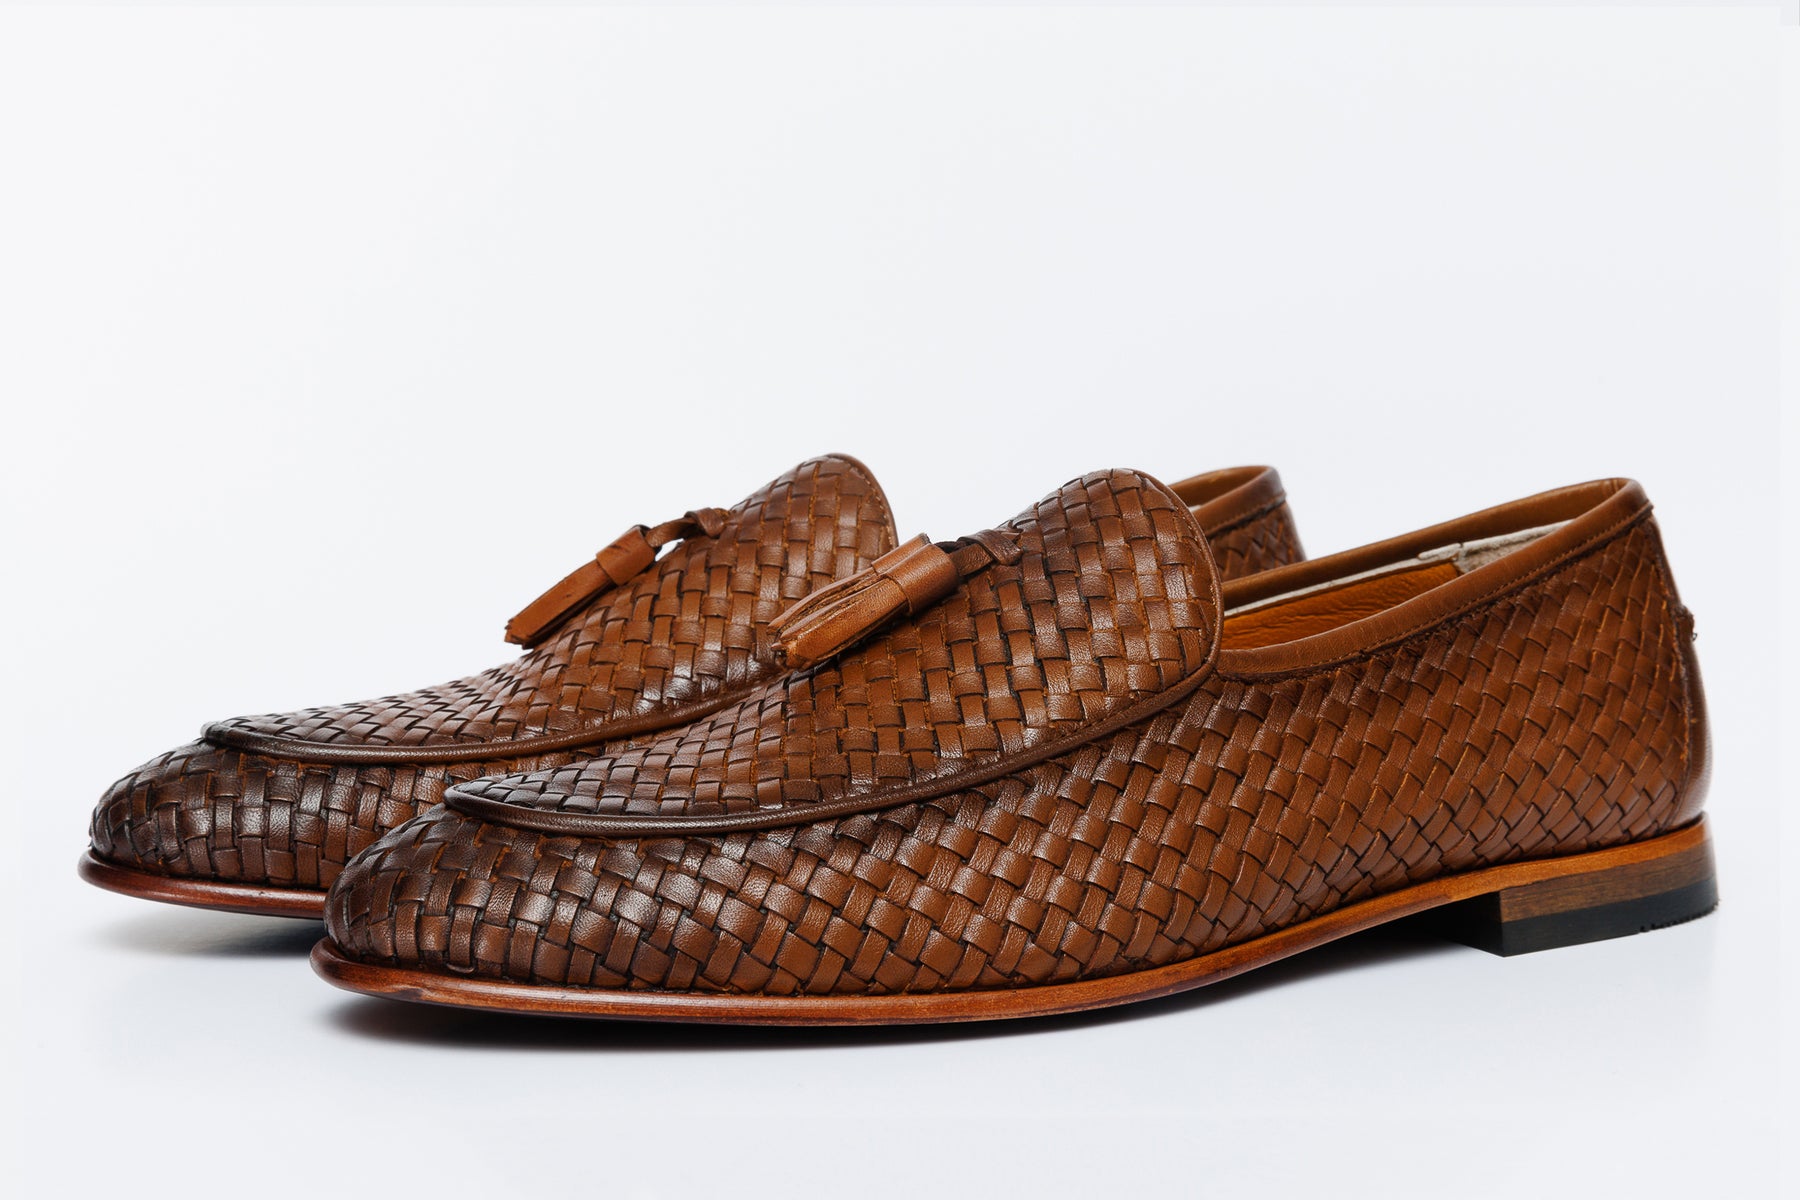 The Mclean Shoe Tan Woven Tassel Loafer – Vinci Leather Shoes